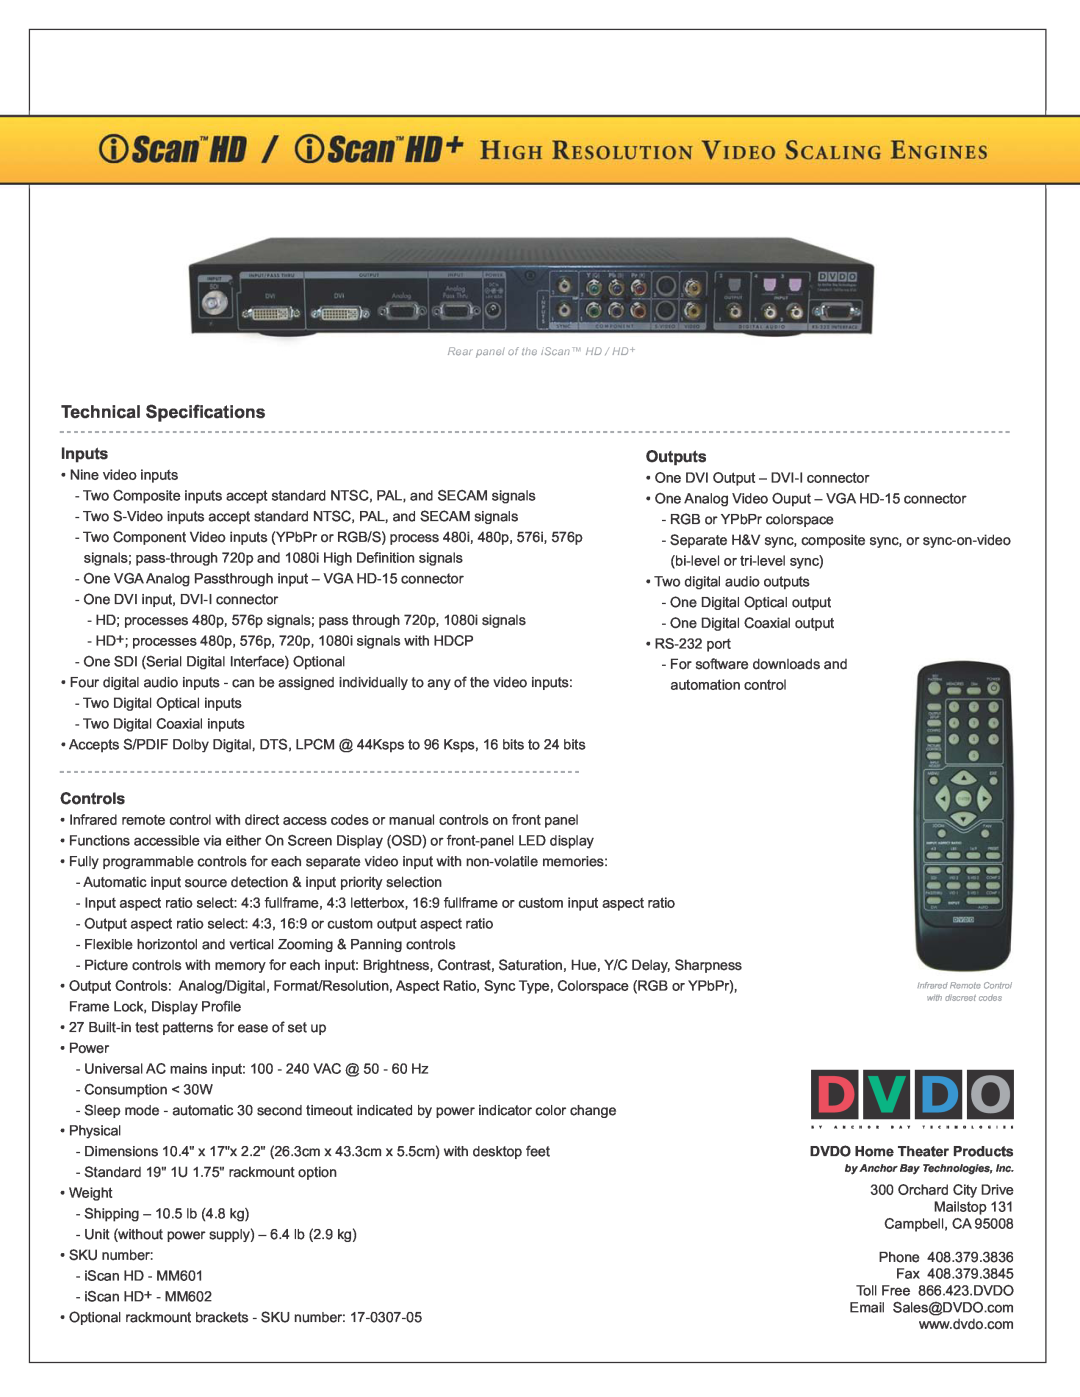 DVDO 9835-2K manual Technical Specifications, Inputs, Outputs, Controls, DVDO Home Theater Products 